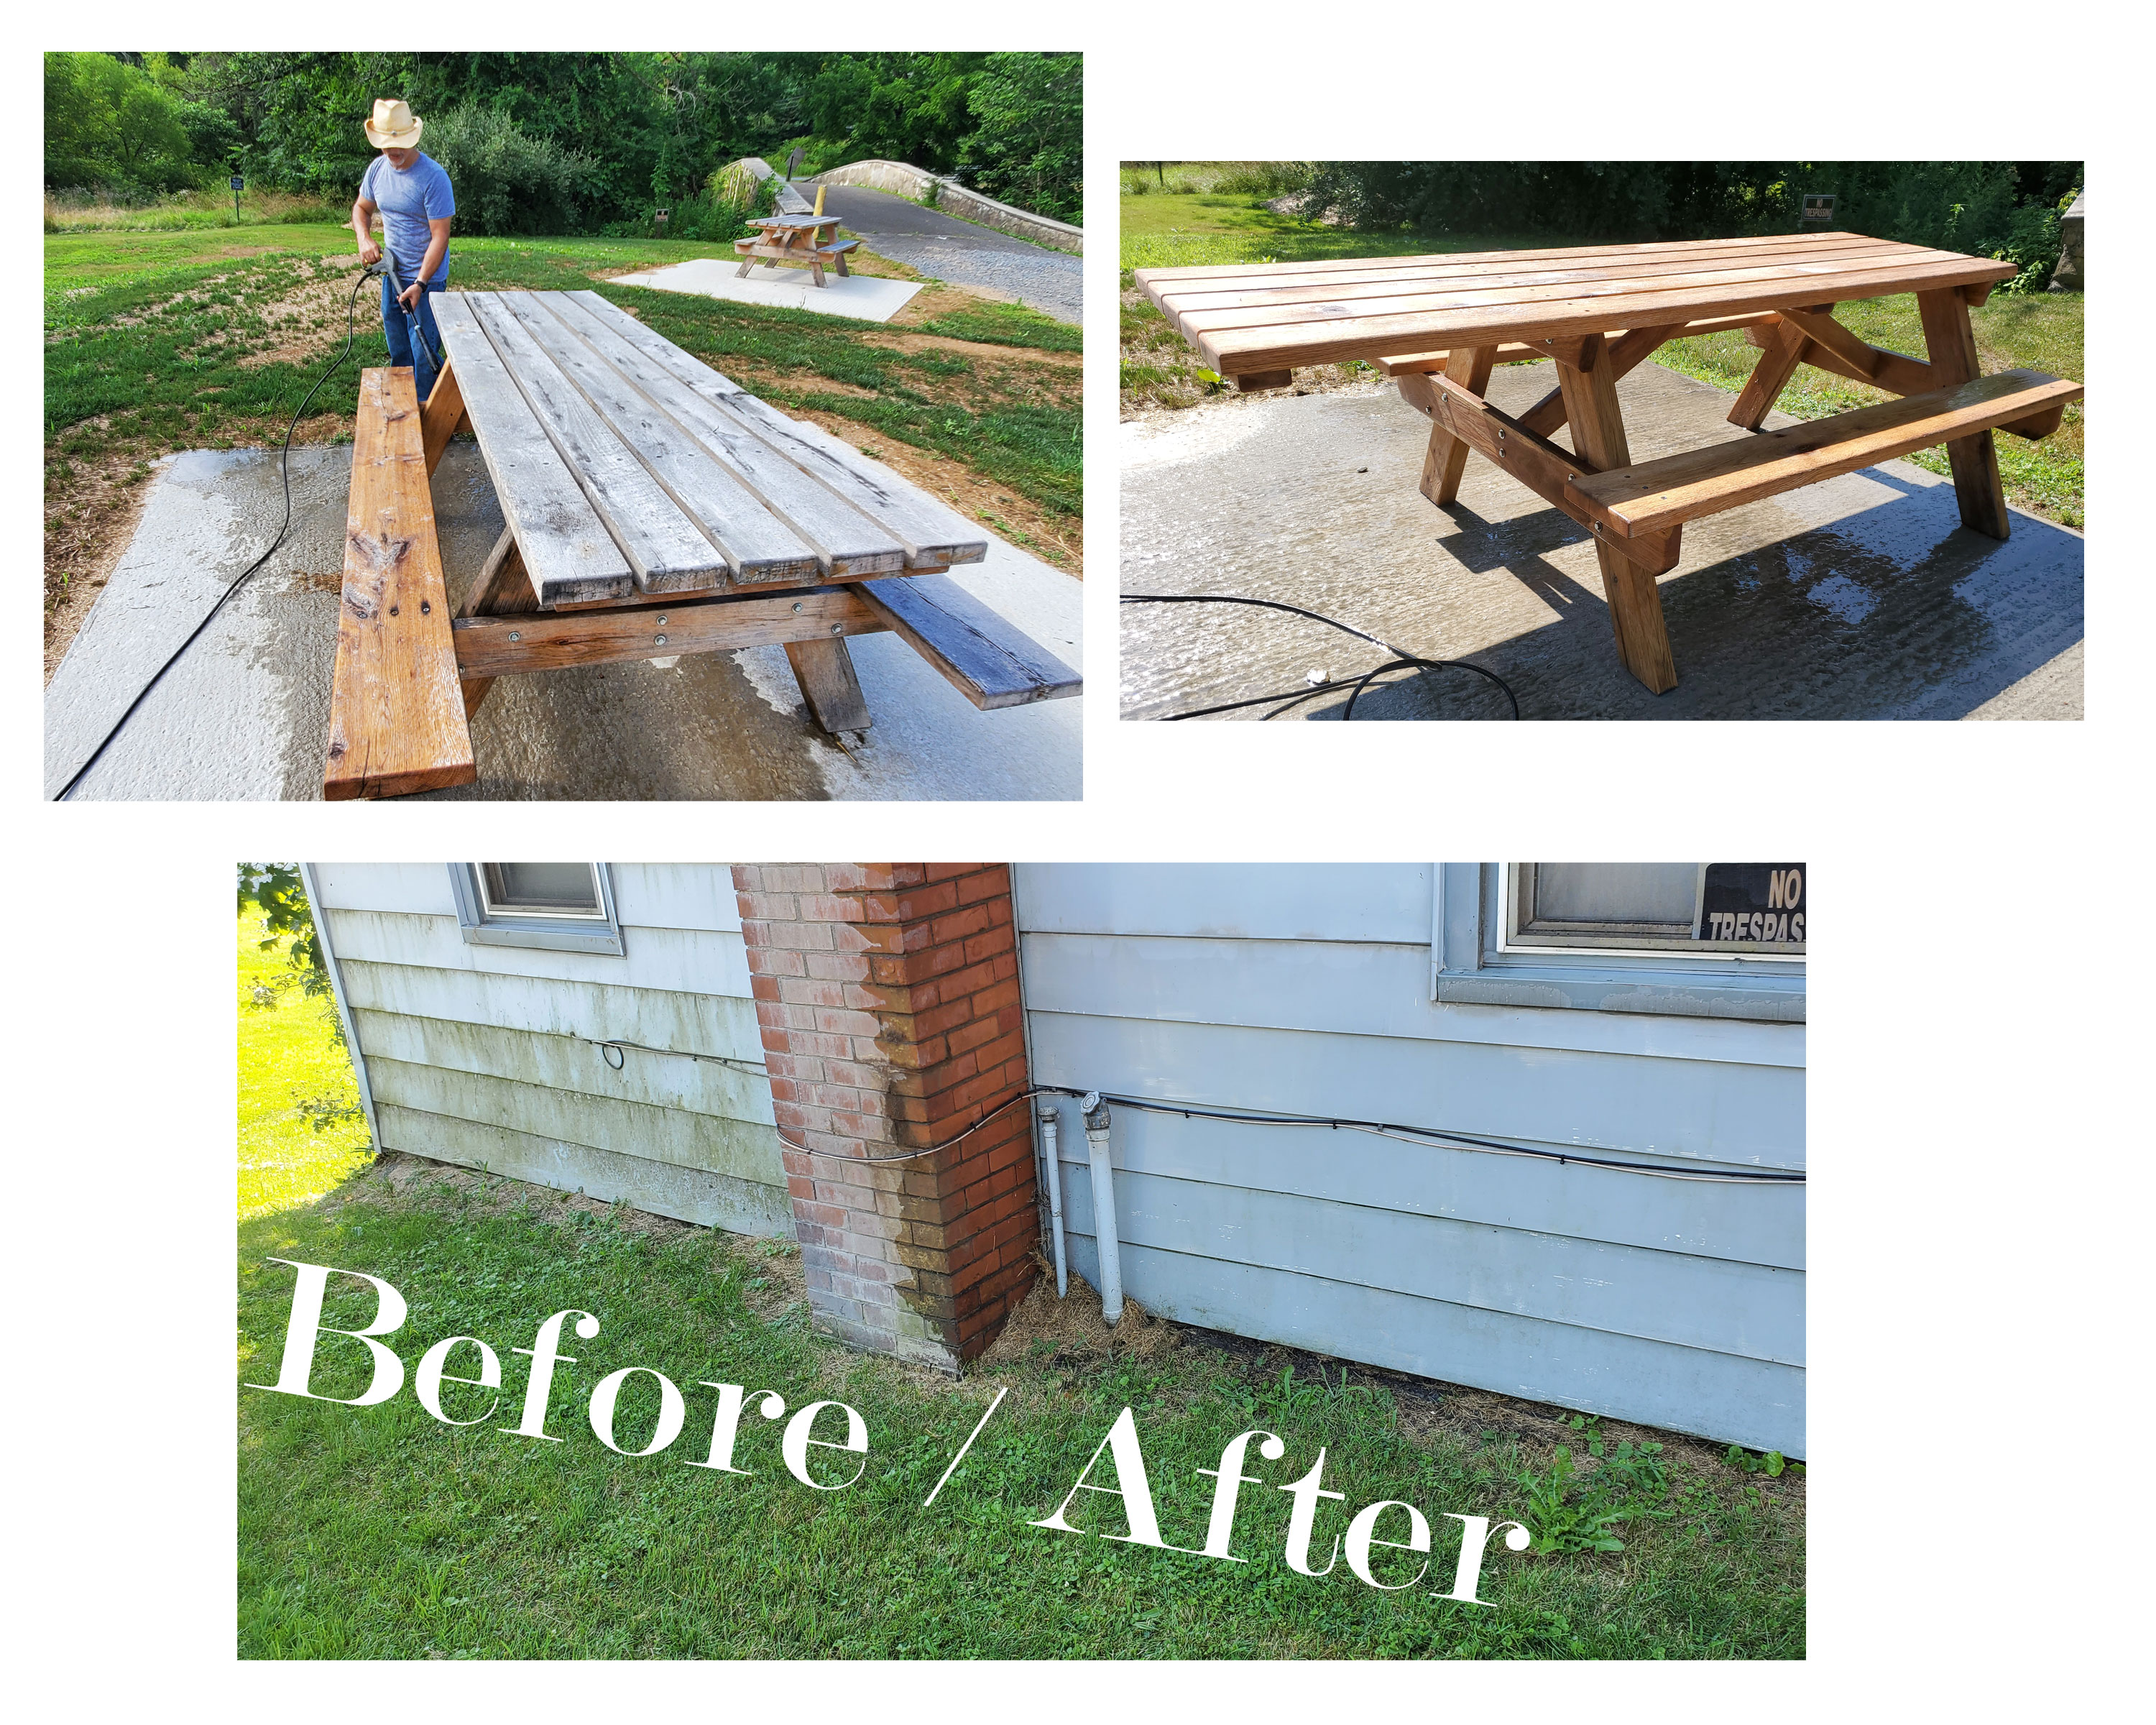 Powerwashing the Smale House and Benches